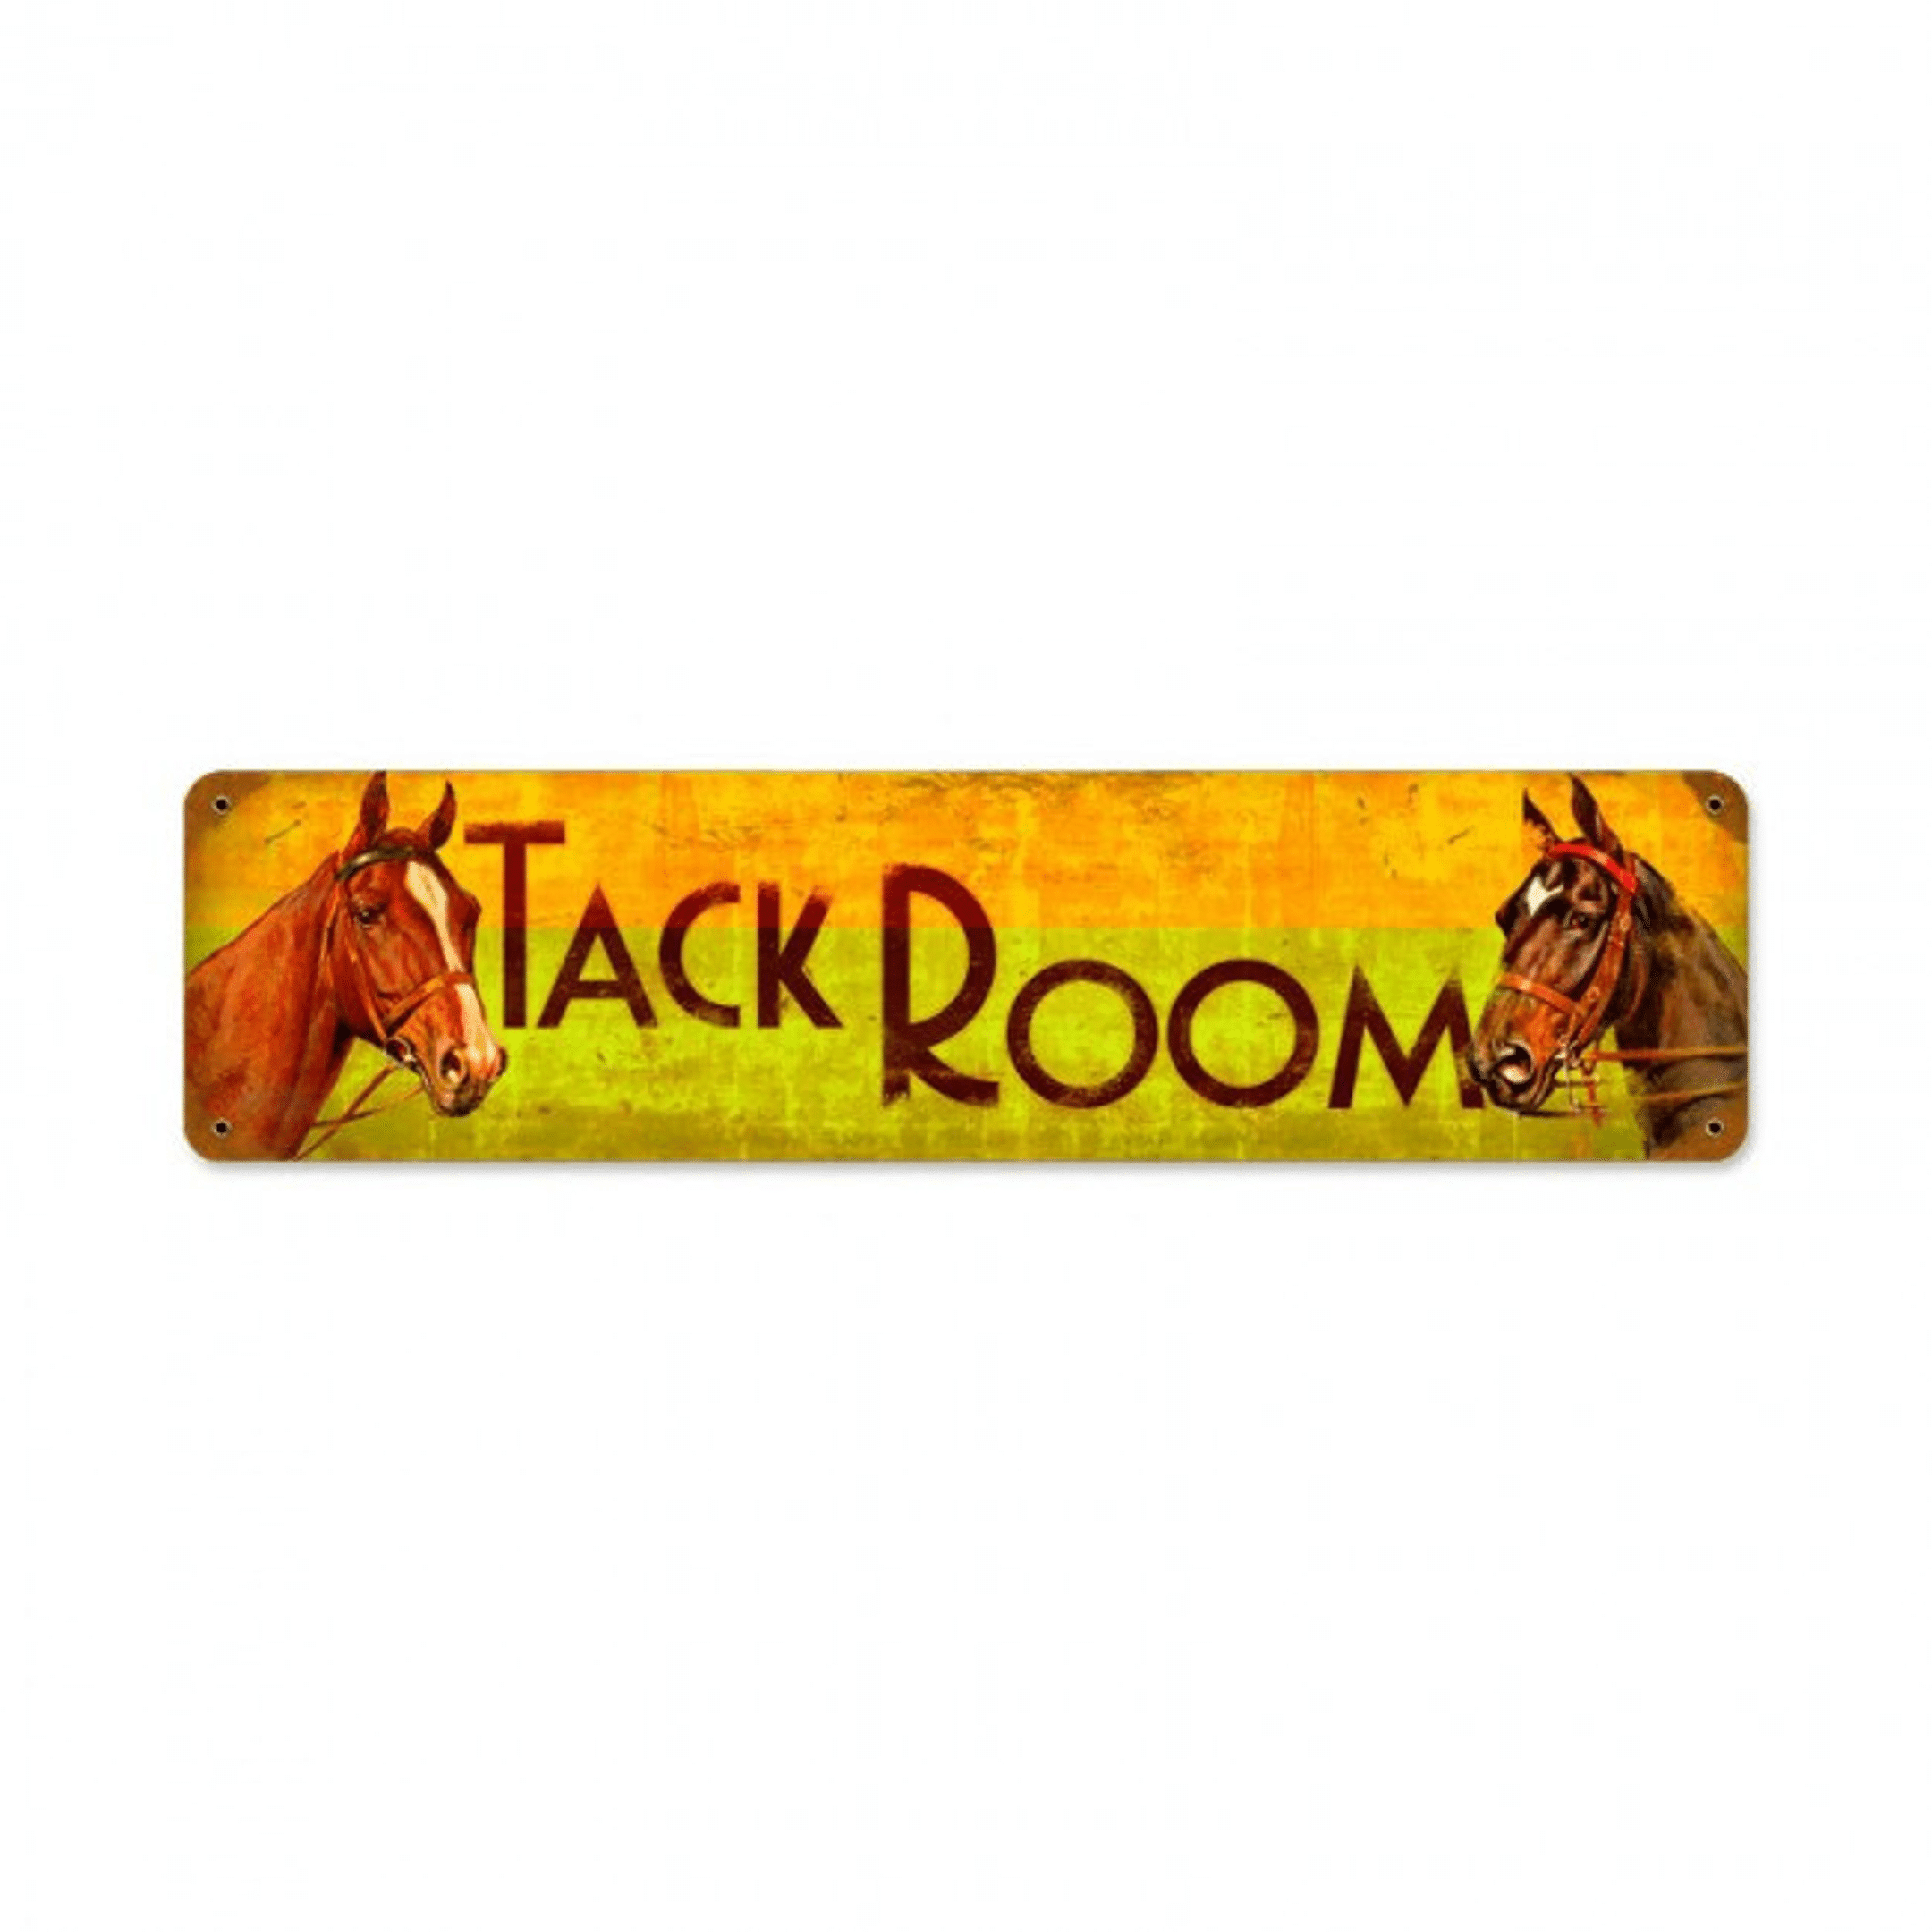 Tack Room metal art sign heavy gauge powder coated vintage style advertising sign rustic country home wall decor PS